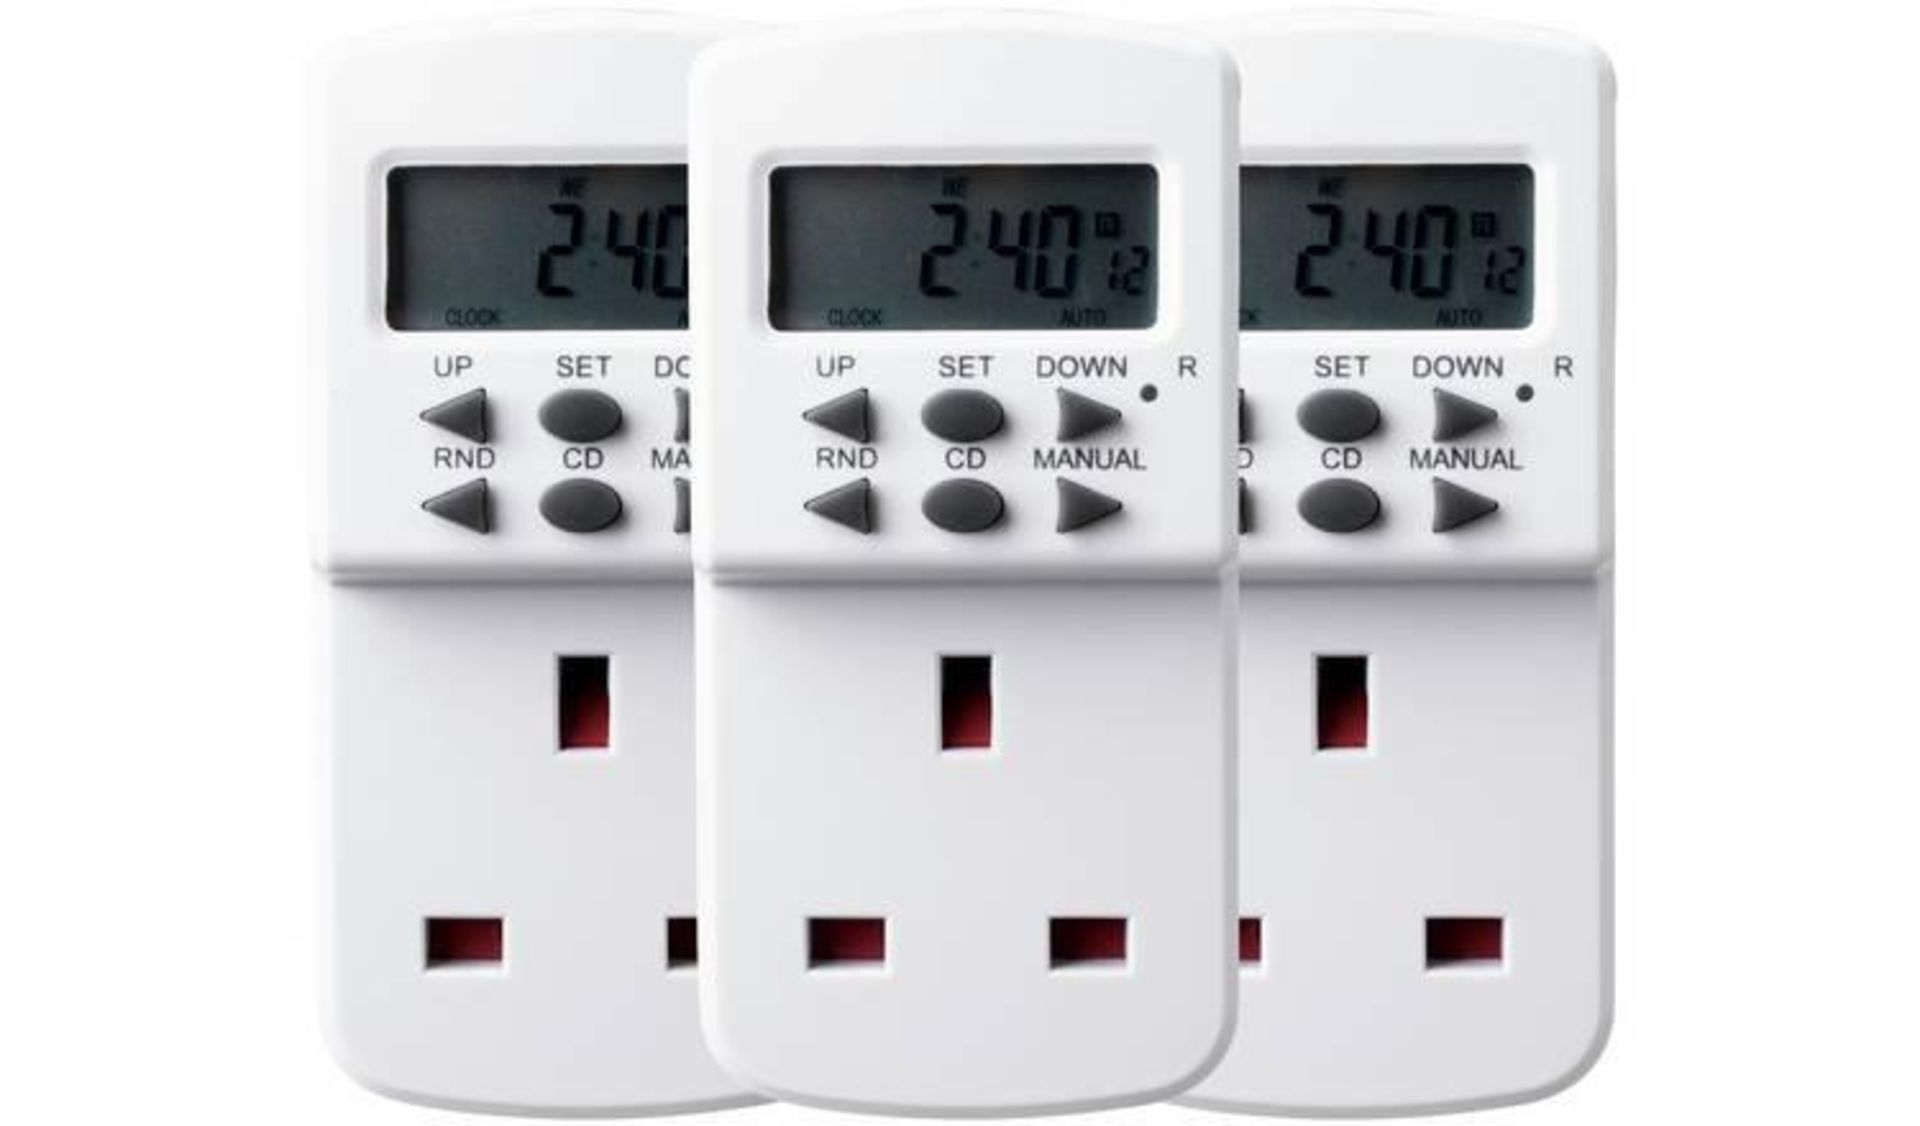 Triple Pack 7-Day Electronic Timers 982/2911 £14.99 RRP